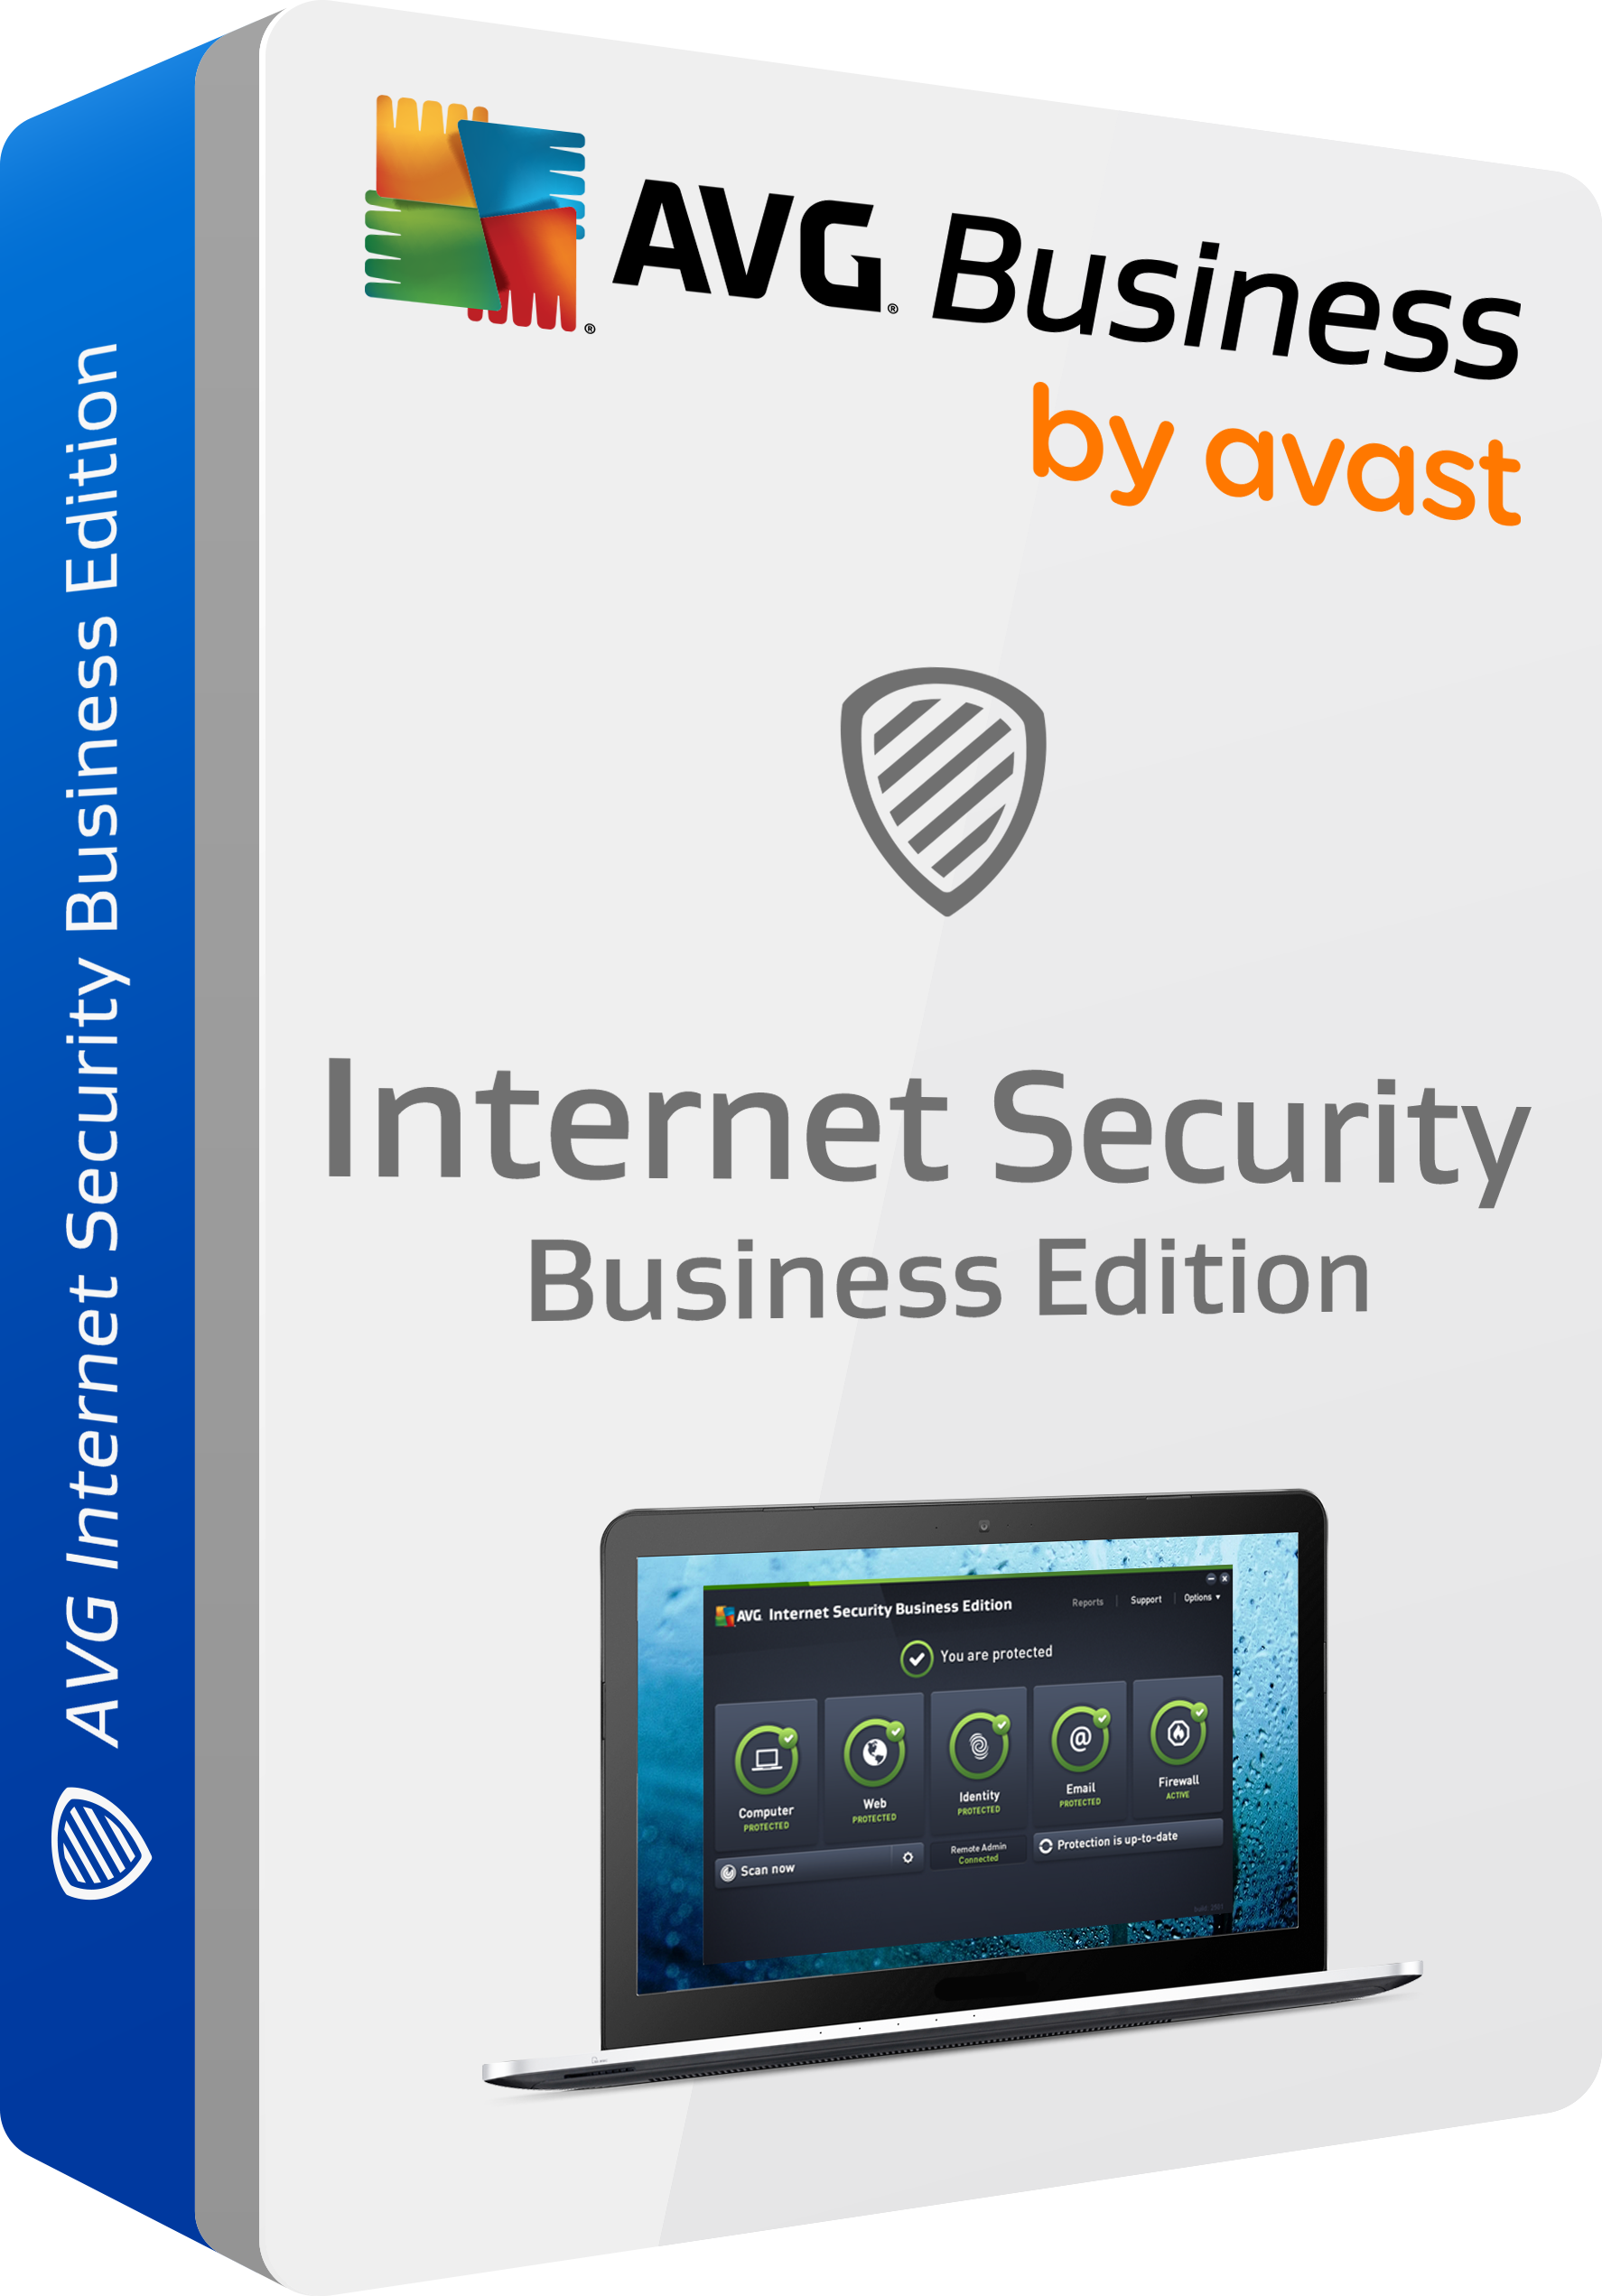 AVG Internet Security Business Edition, 1 Year License